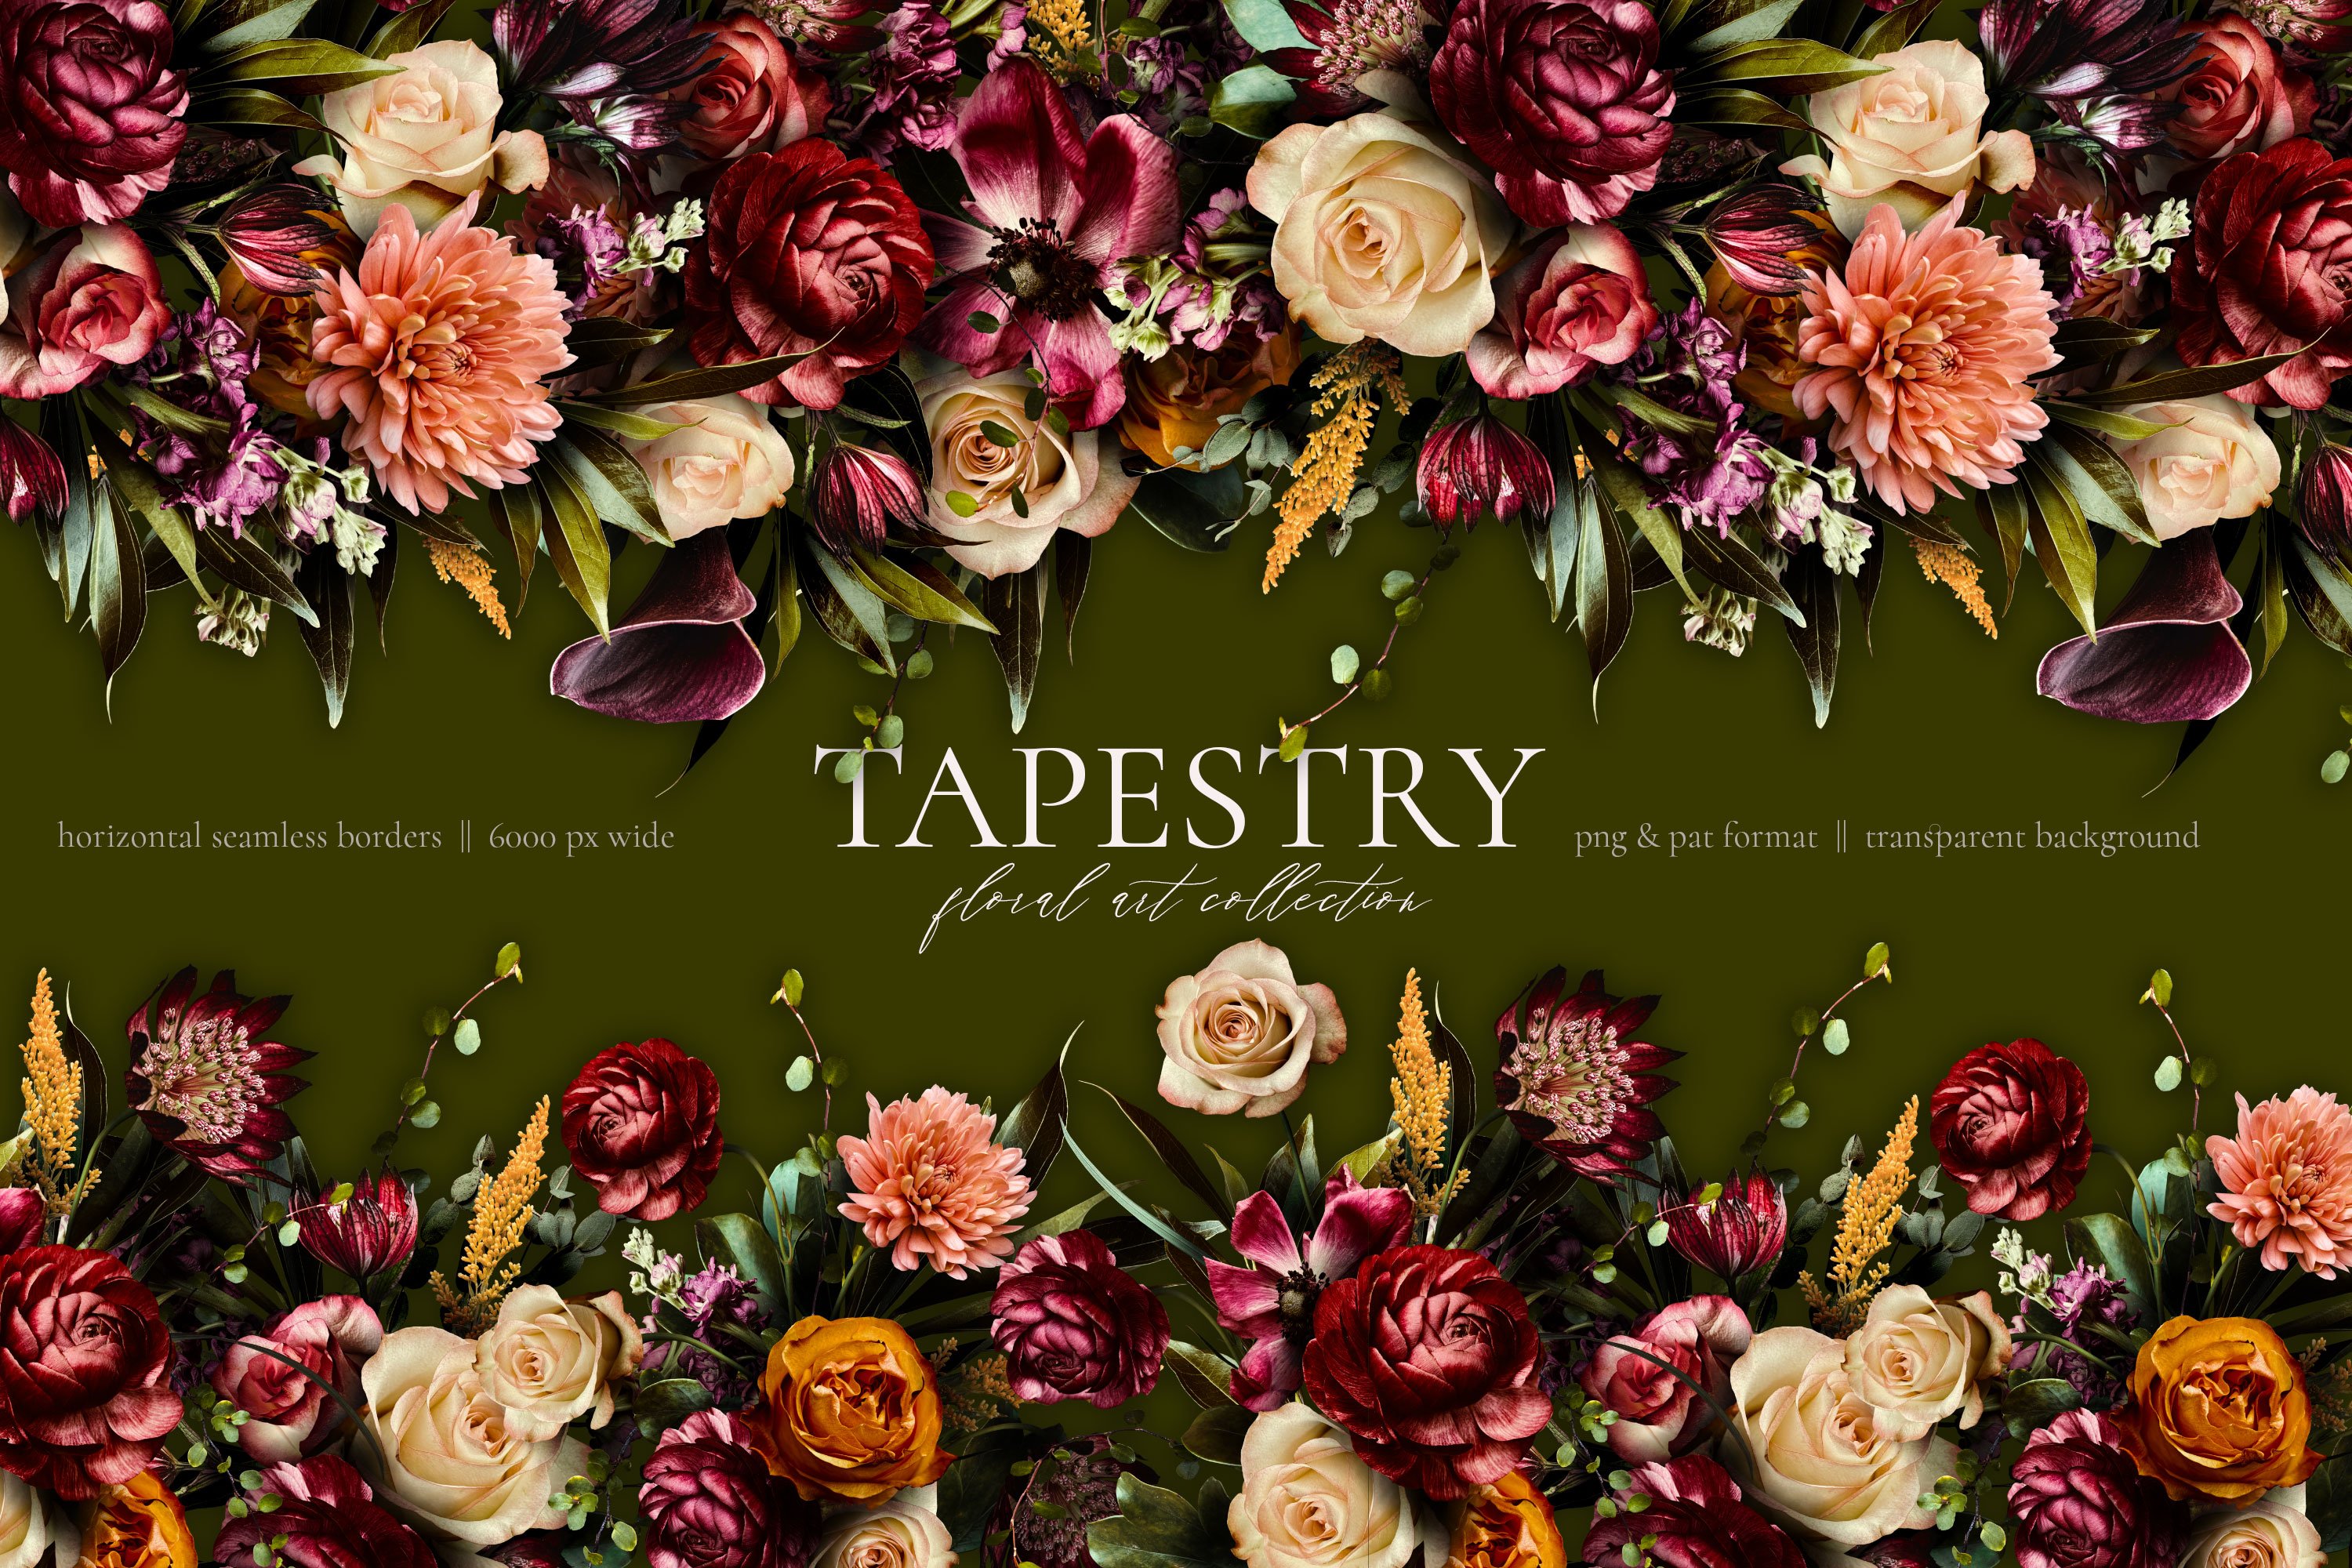 Tapestry Floral Art Collection